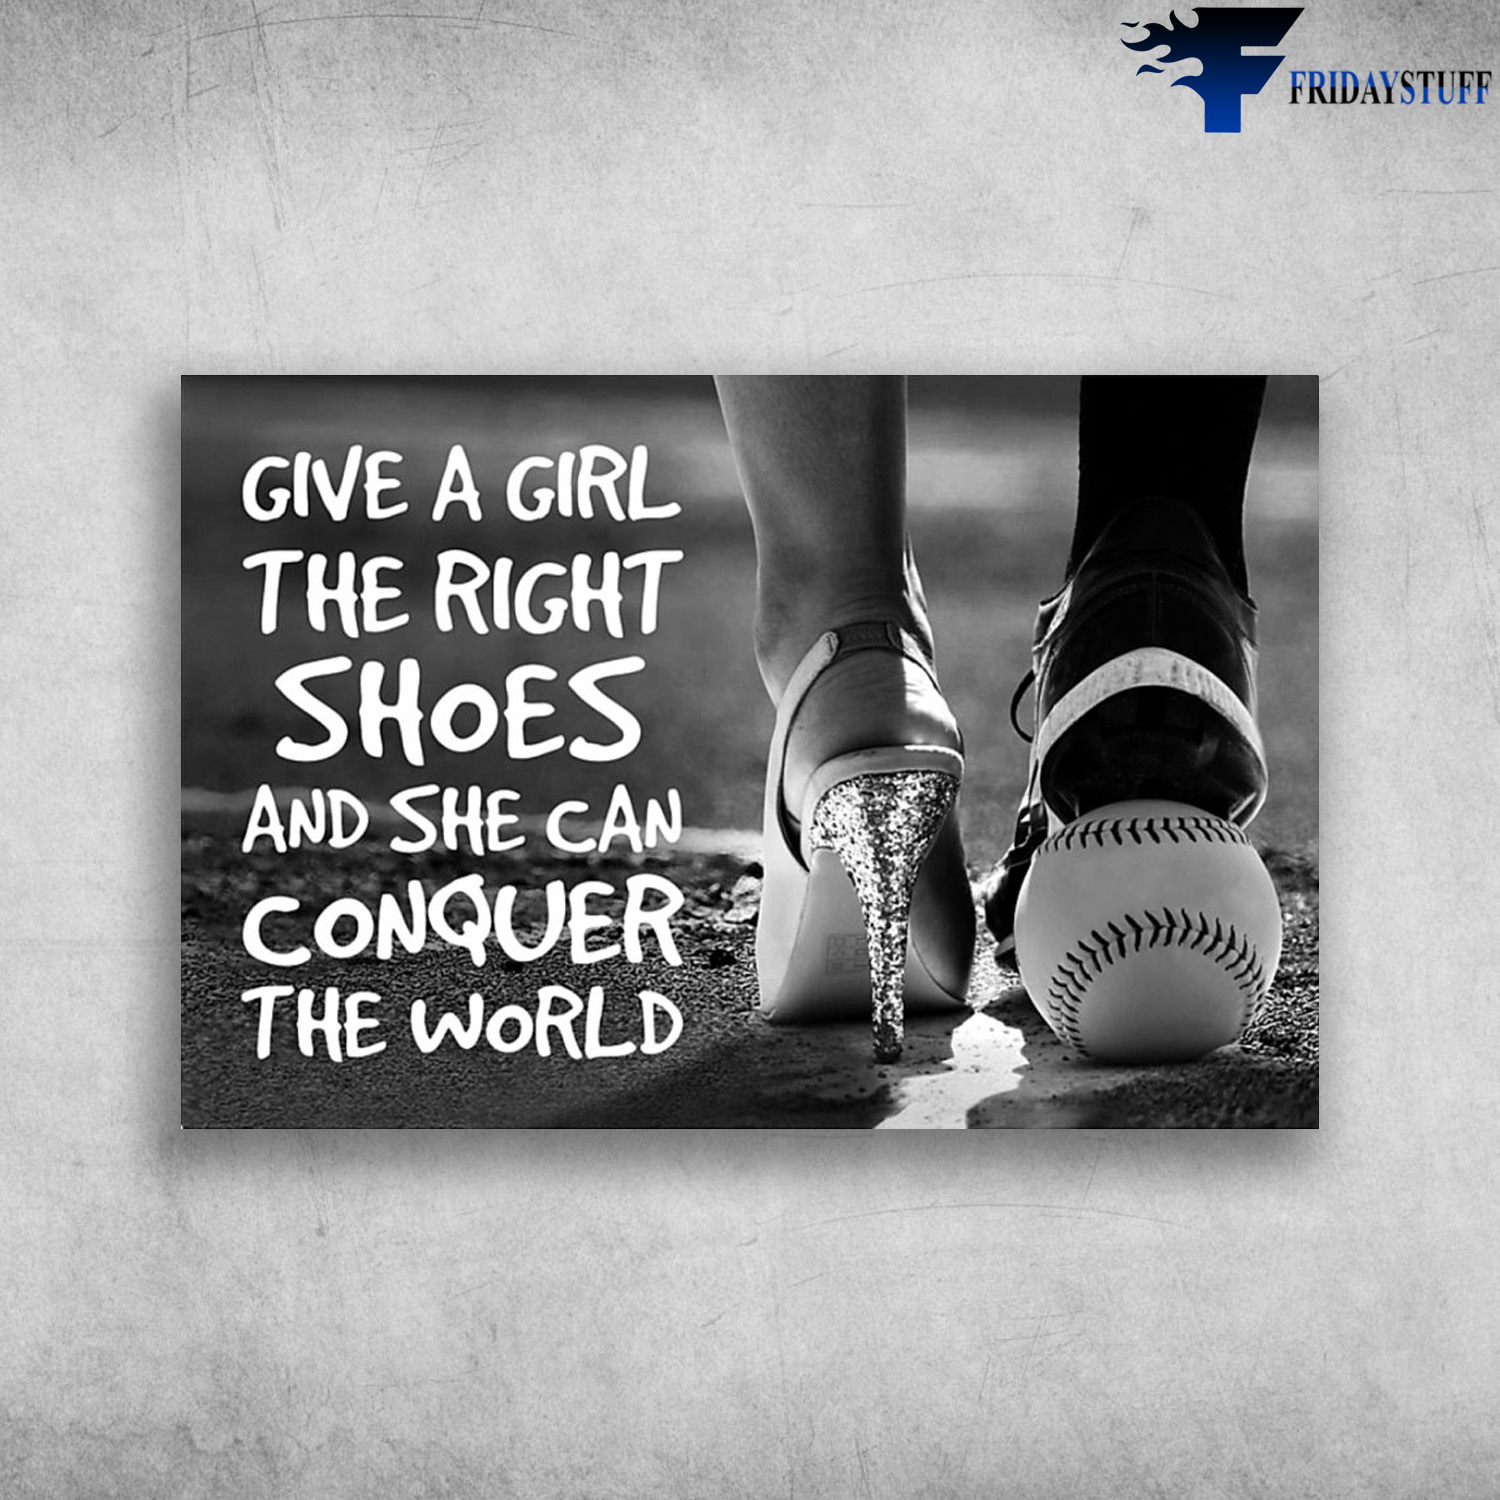 Girl Loves Softball - Give A Girl The Right Shoes, And She Can Conquer The World